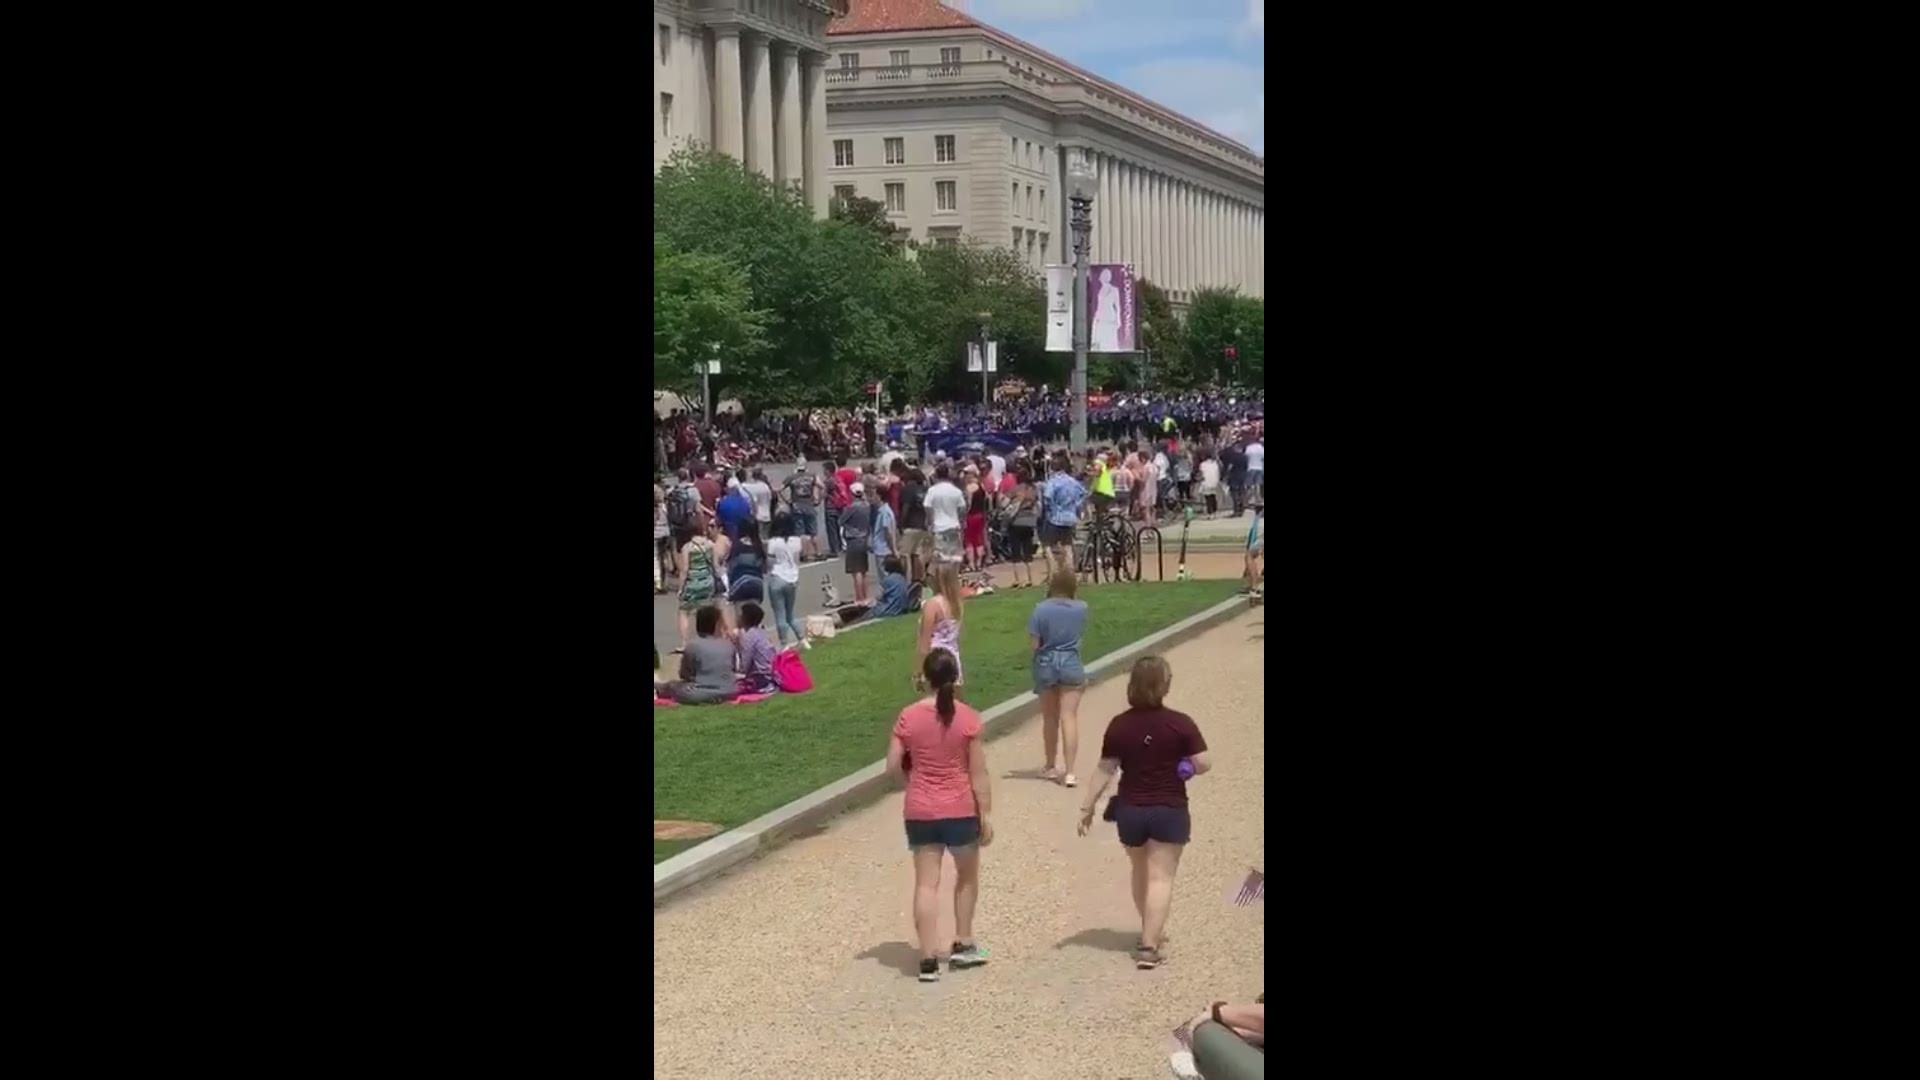 The band performed in the Memorial Day parade in Washington D.C.